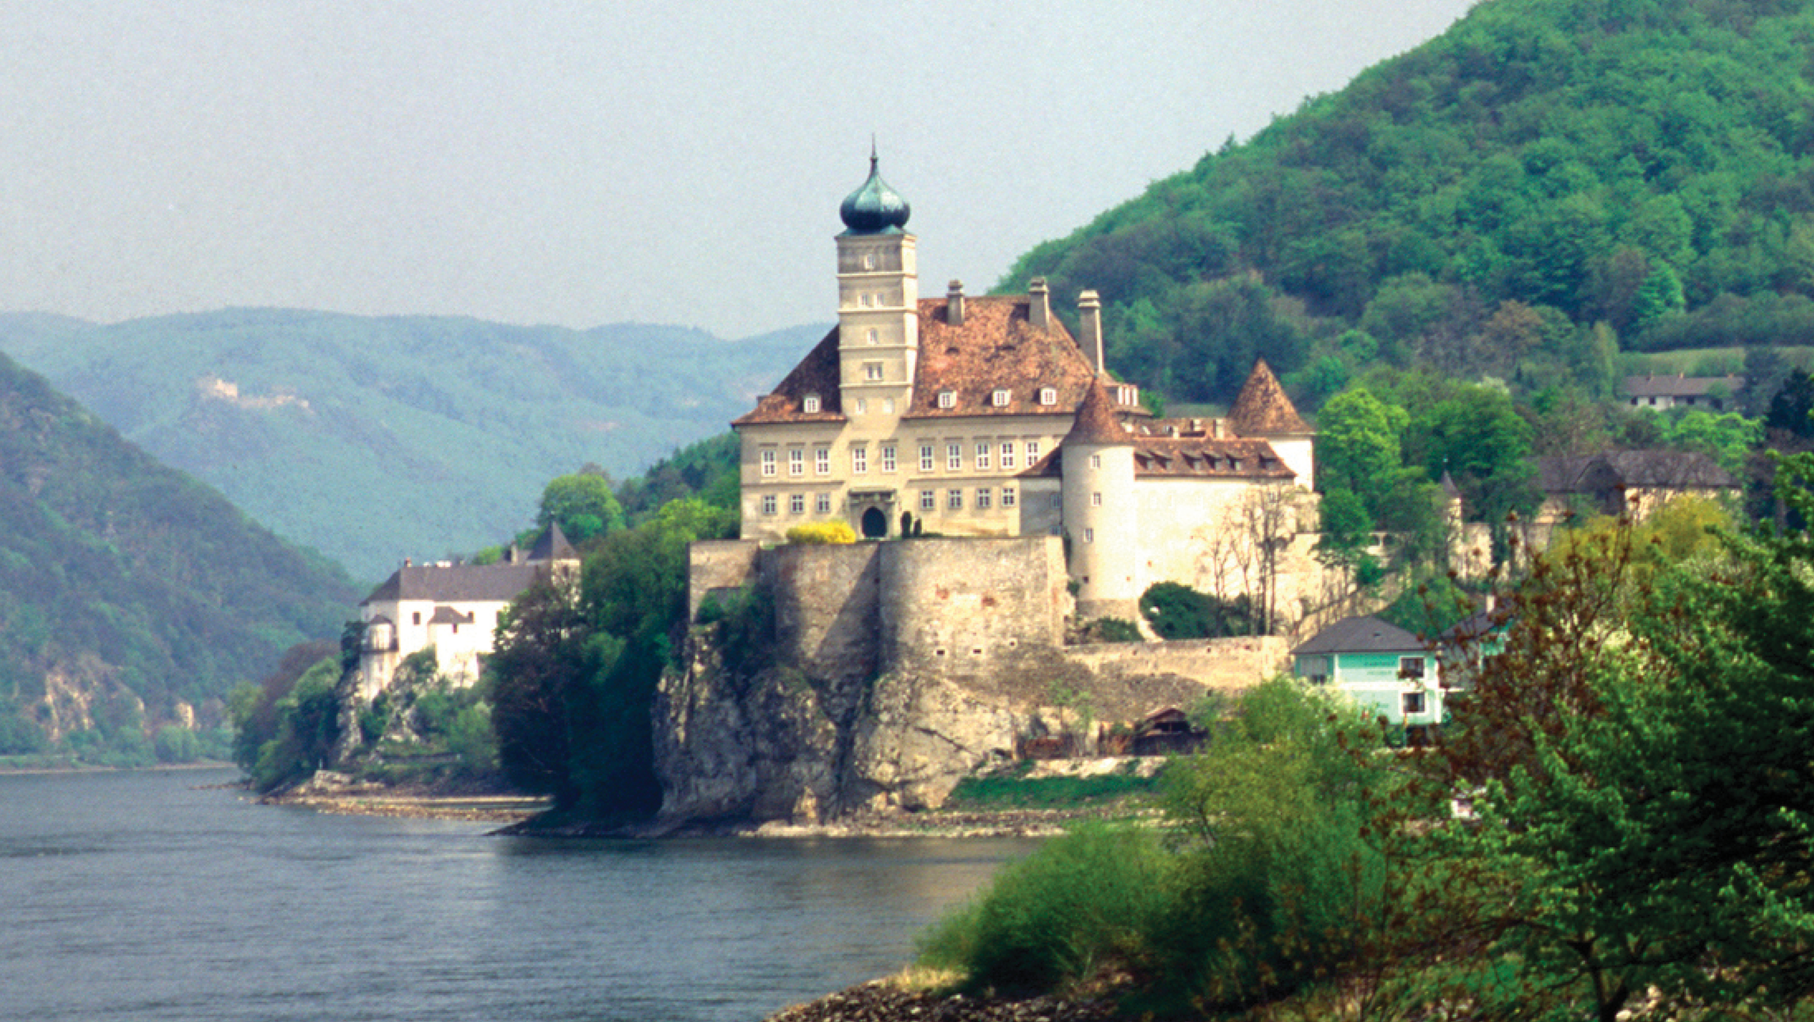 A view of the Danube River cruise with a castle